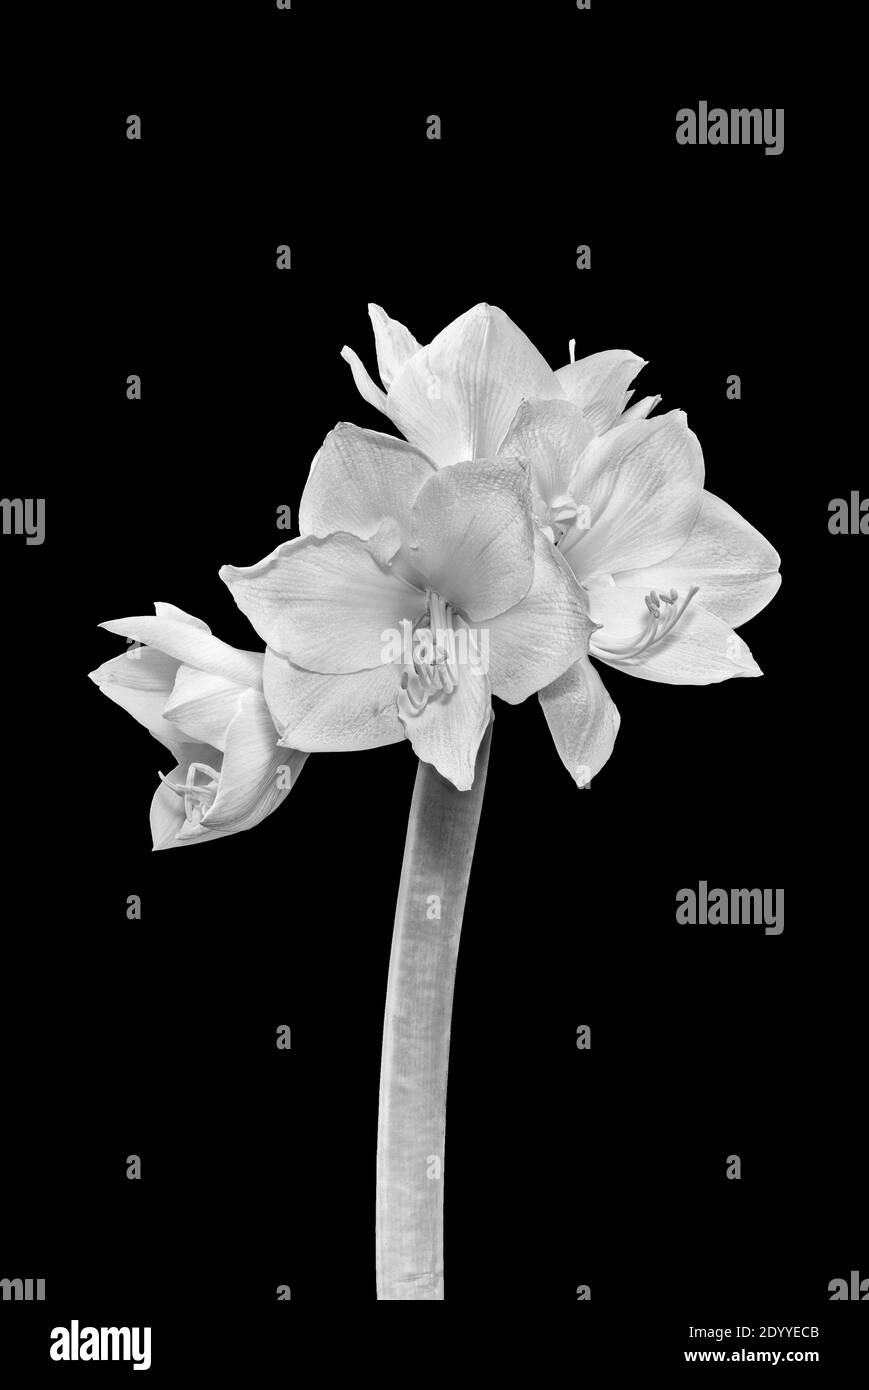 glossy white amaryllis with four open blossoms and green stem on black background, fine art still life monochrome macro, detailed textured blooms Stock Photo